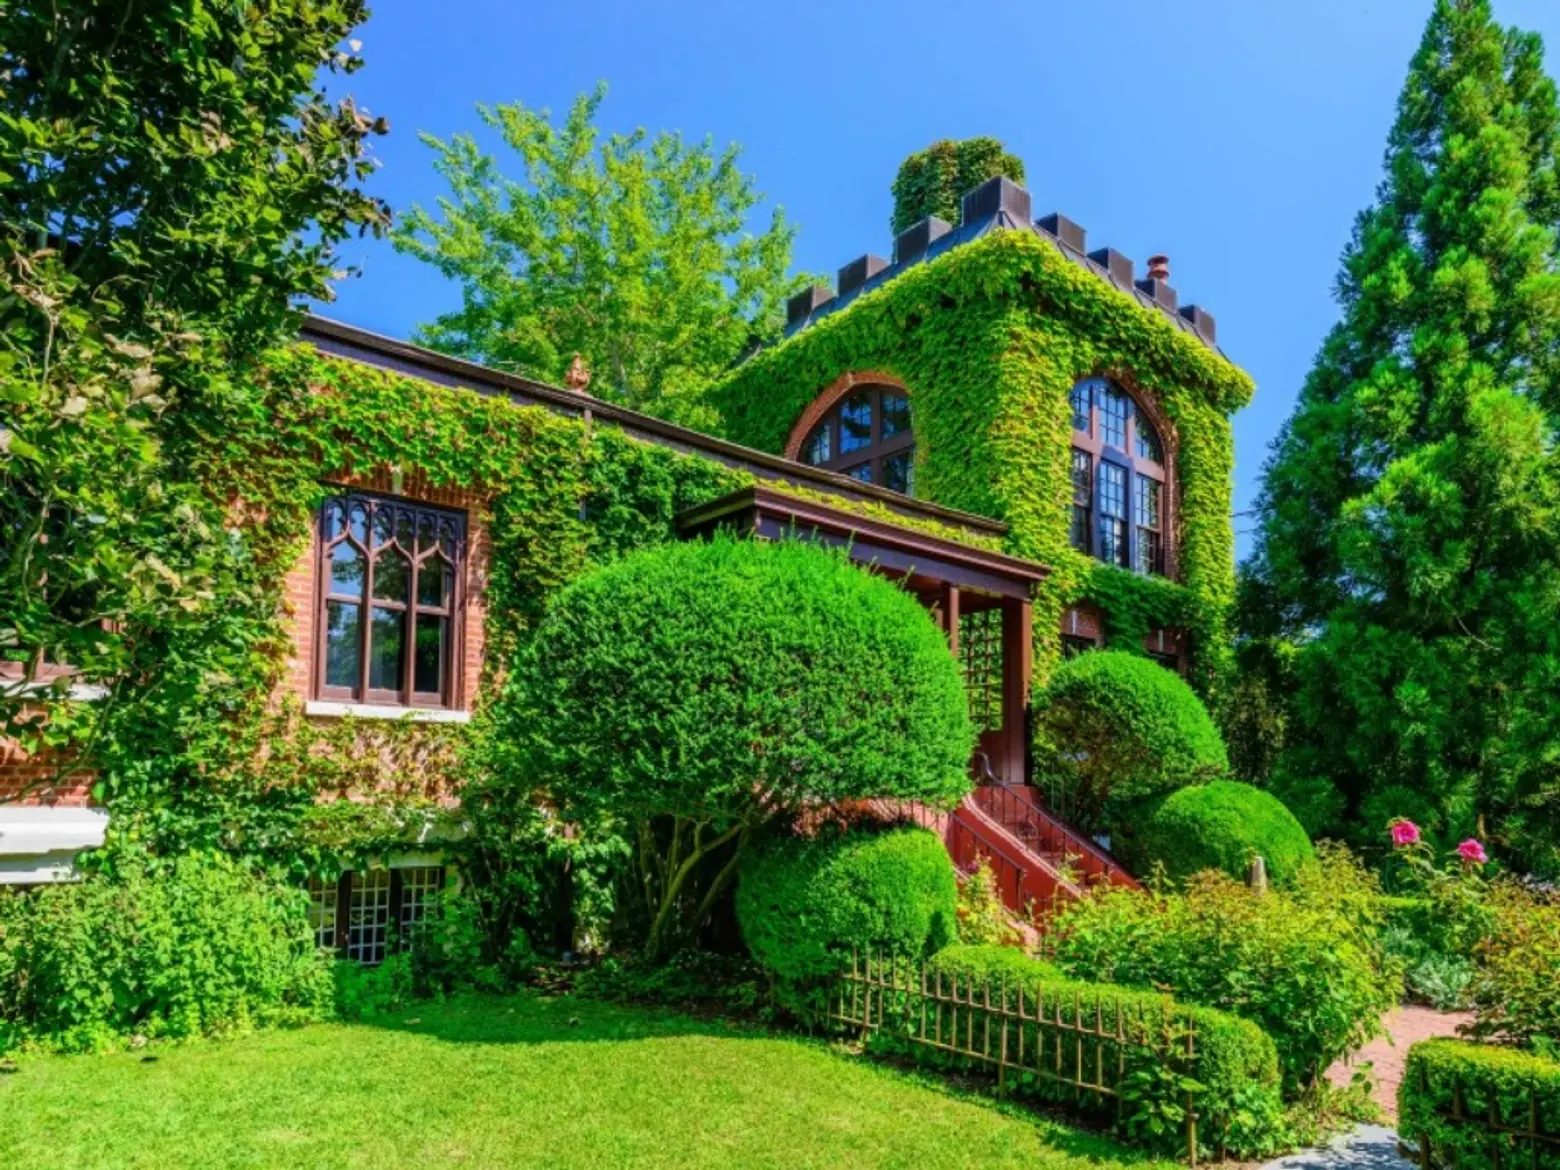 Live Like Hamptons Royalty in the $4.3M Red-Brick Castle